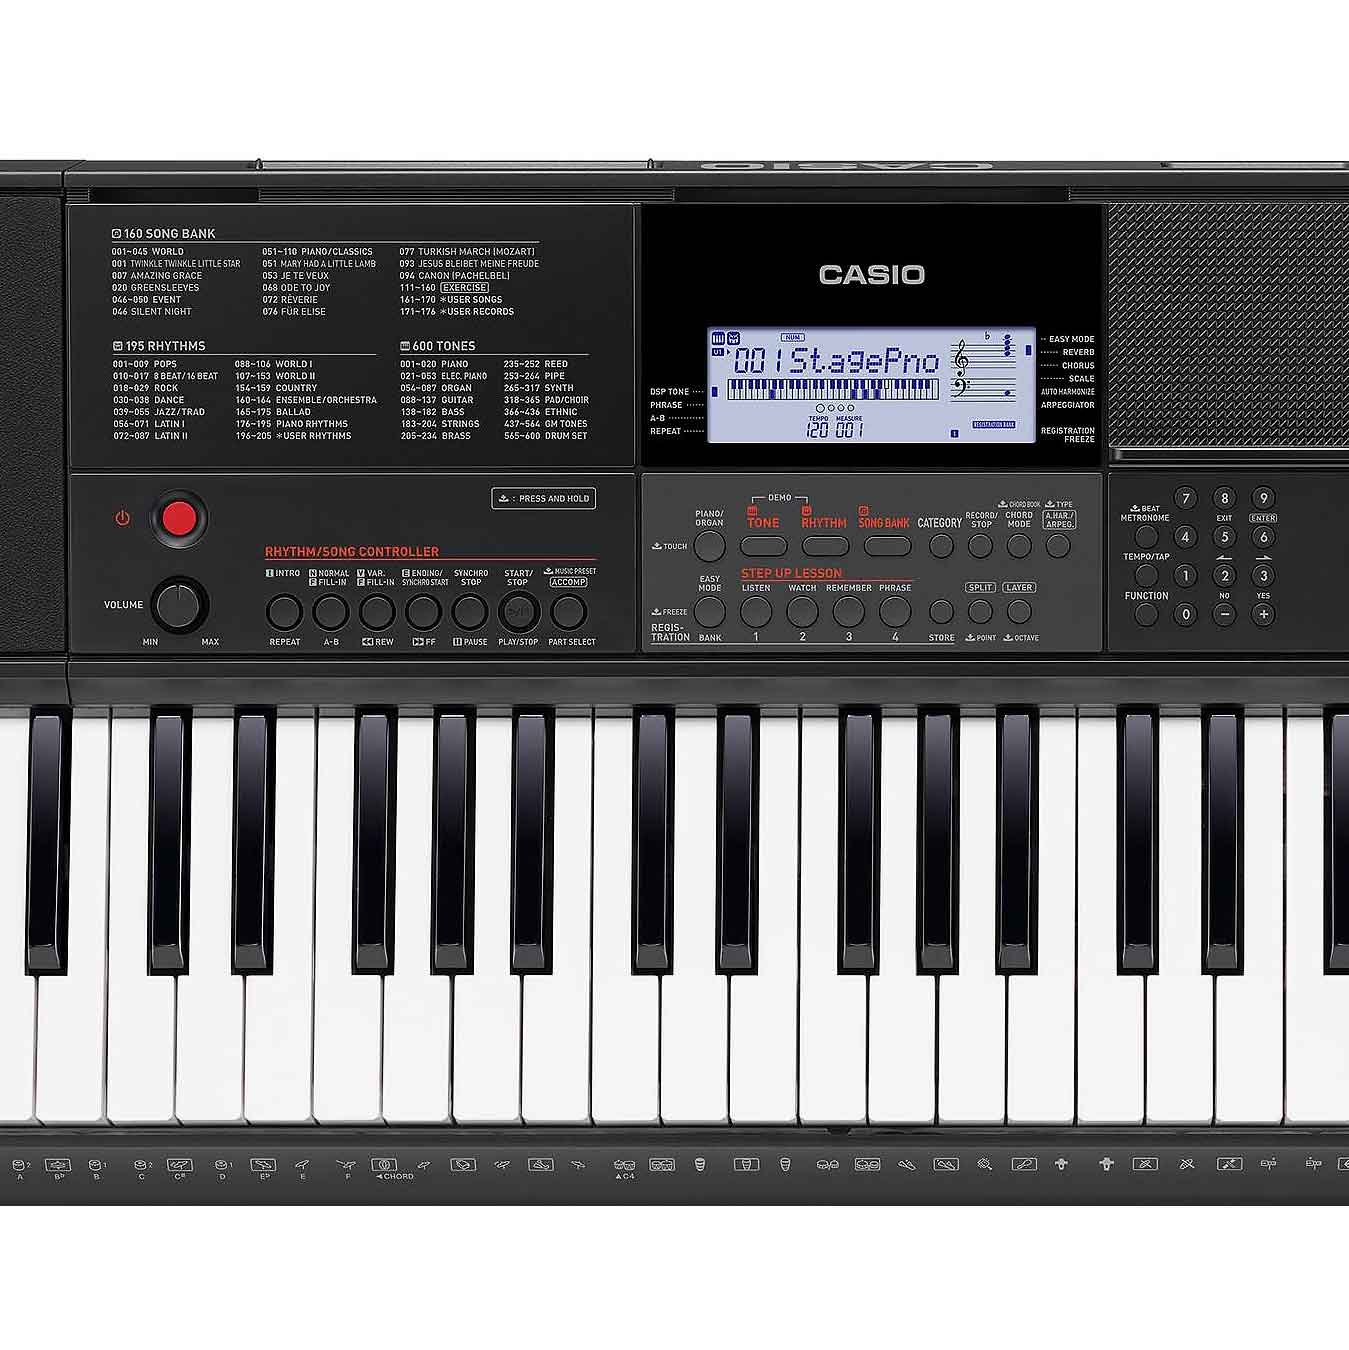 CASIO CT-X700 61-Key Portable Keyboard-Andy's Music